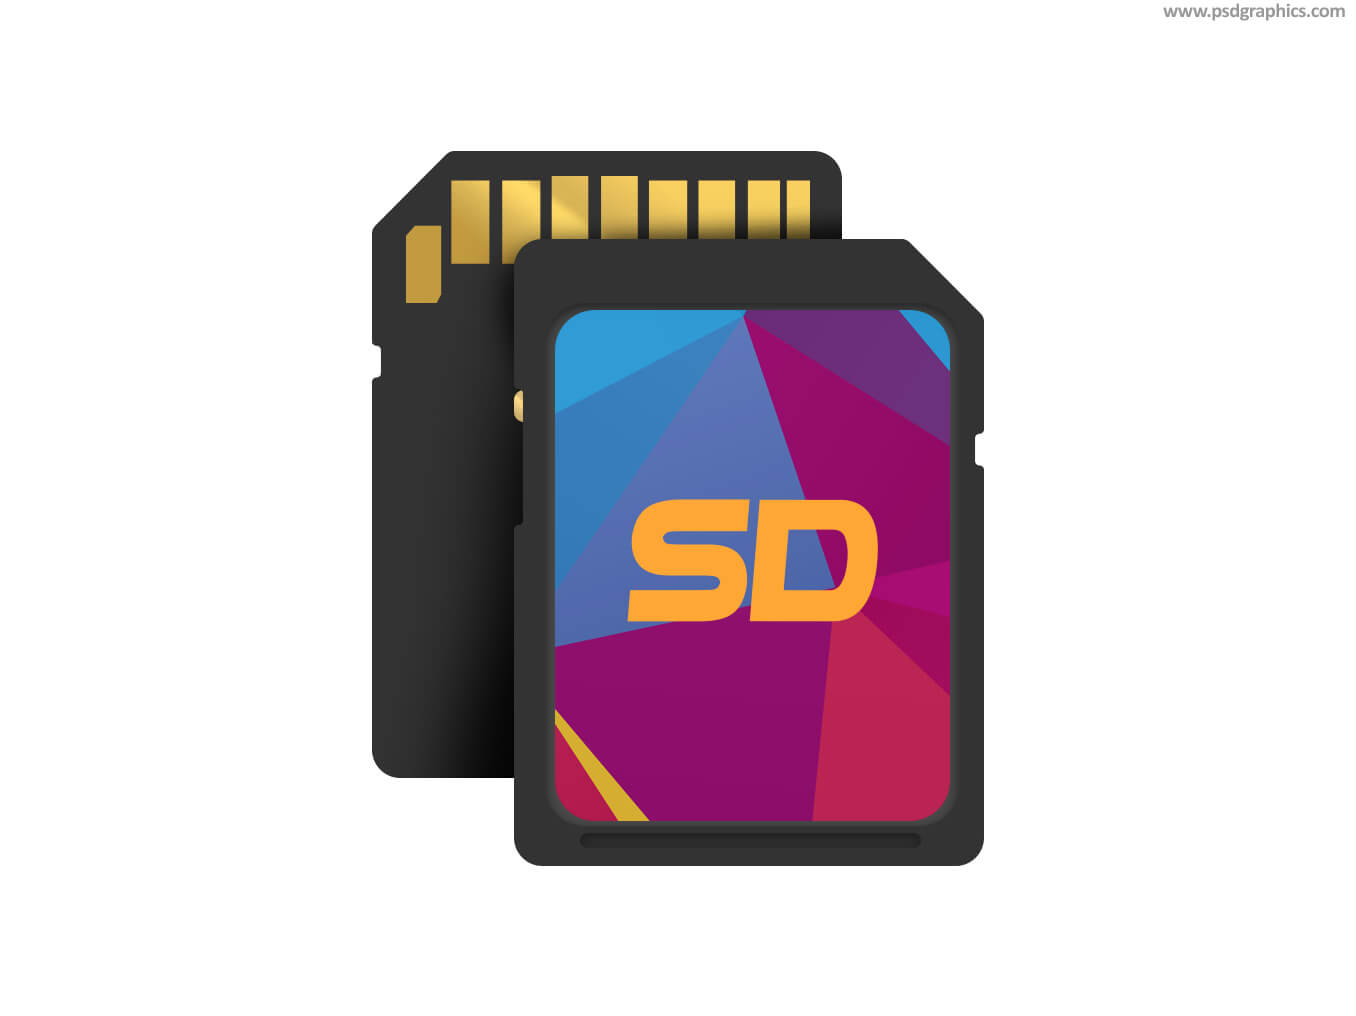 Sd Memory Card Icon Psd | Psdgraphics With Regard To In Memory Cards Templates